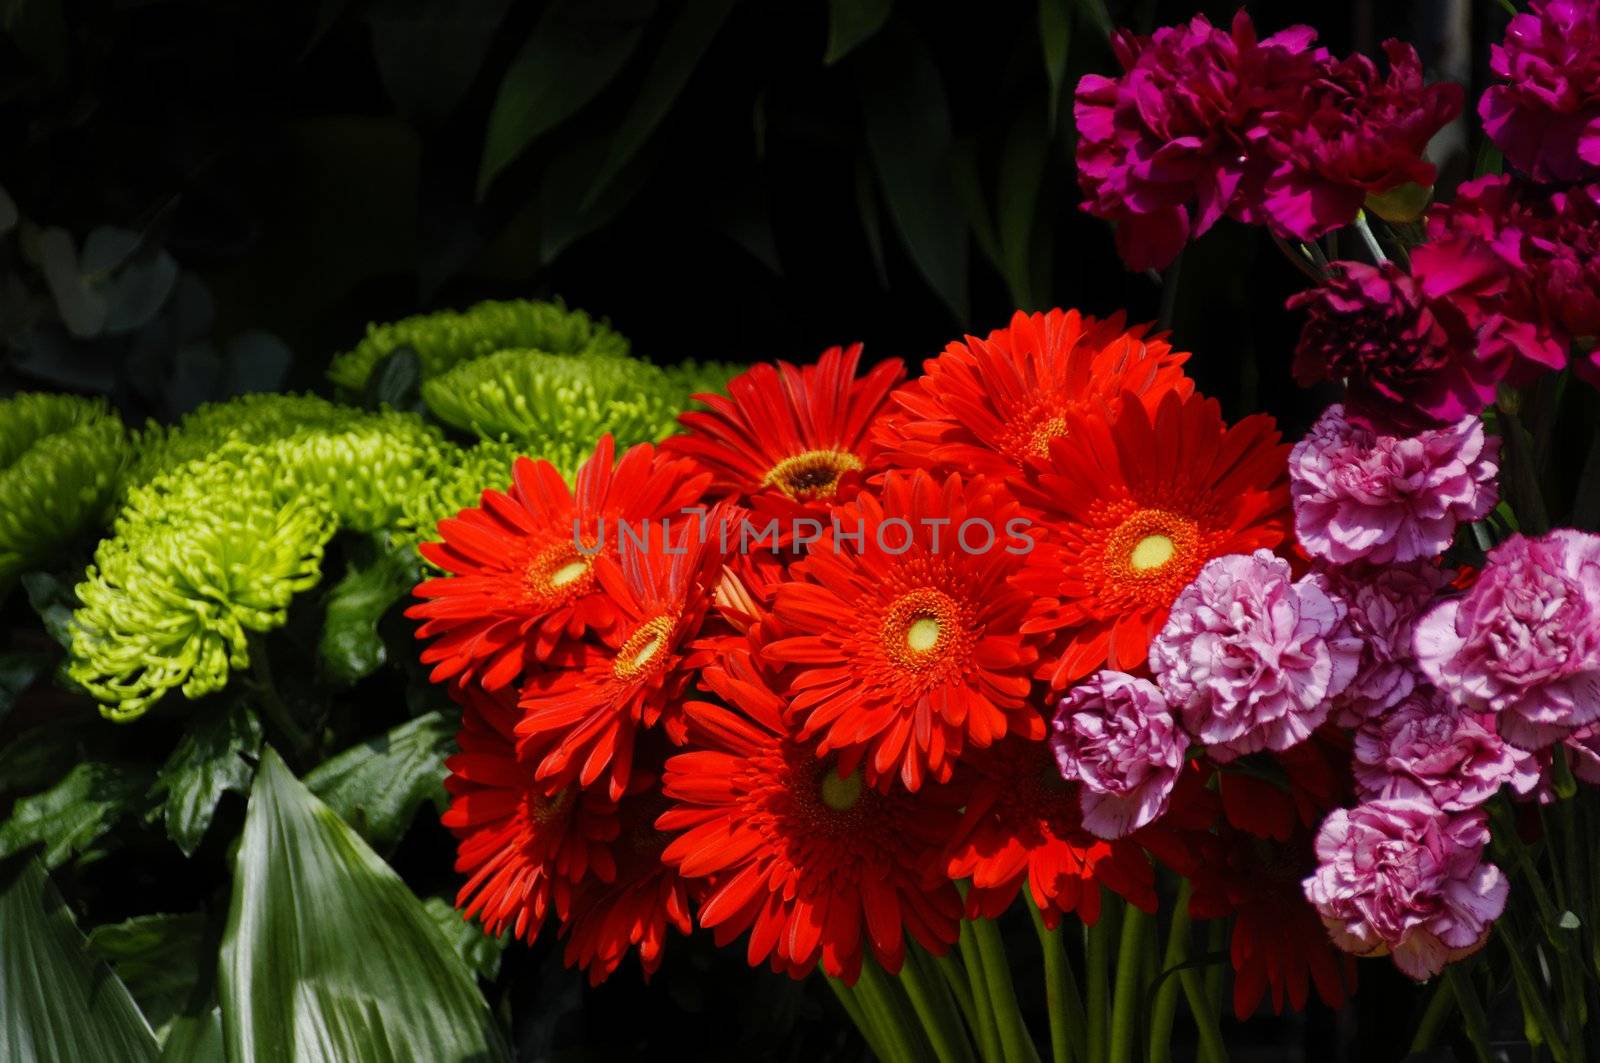 Flowers on a florist stall, red gerbera daisies